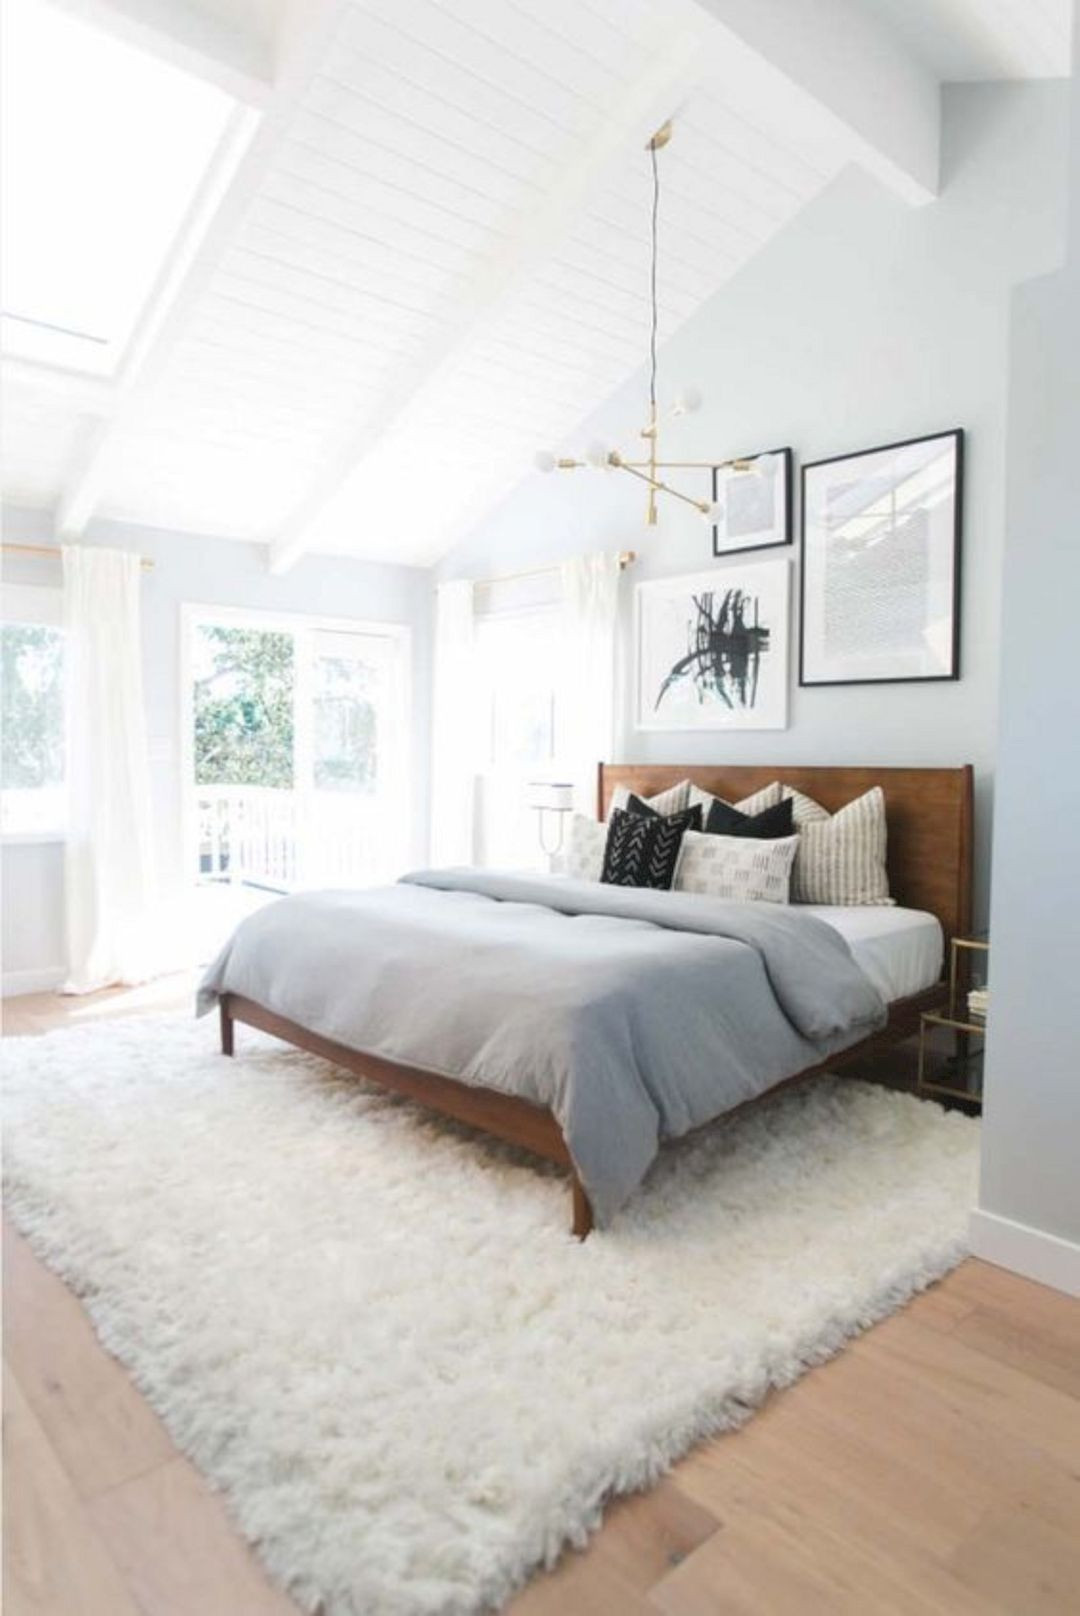 Light Grey Bedroom Ideas
 spacious and airy bedroom vaulted shiplap ceilings